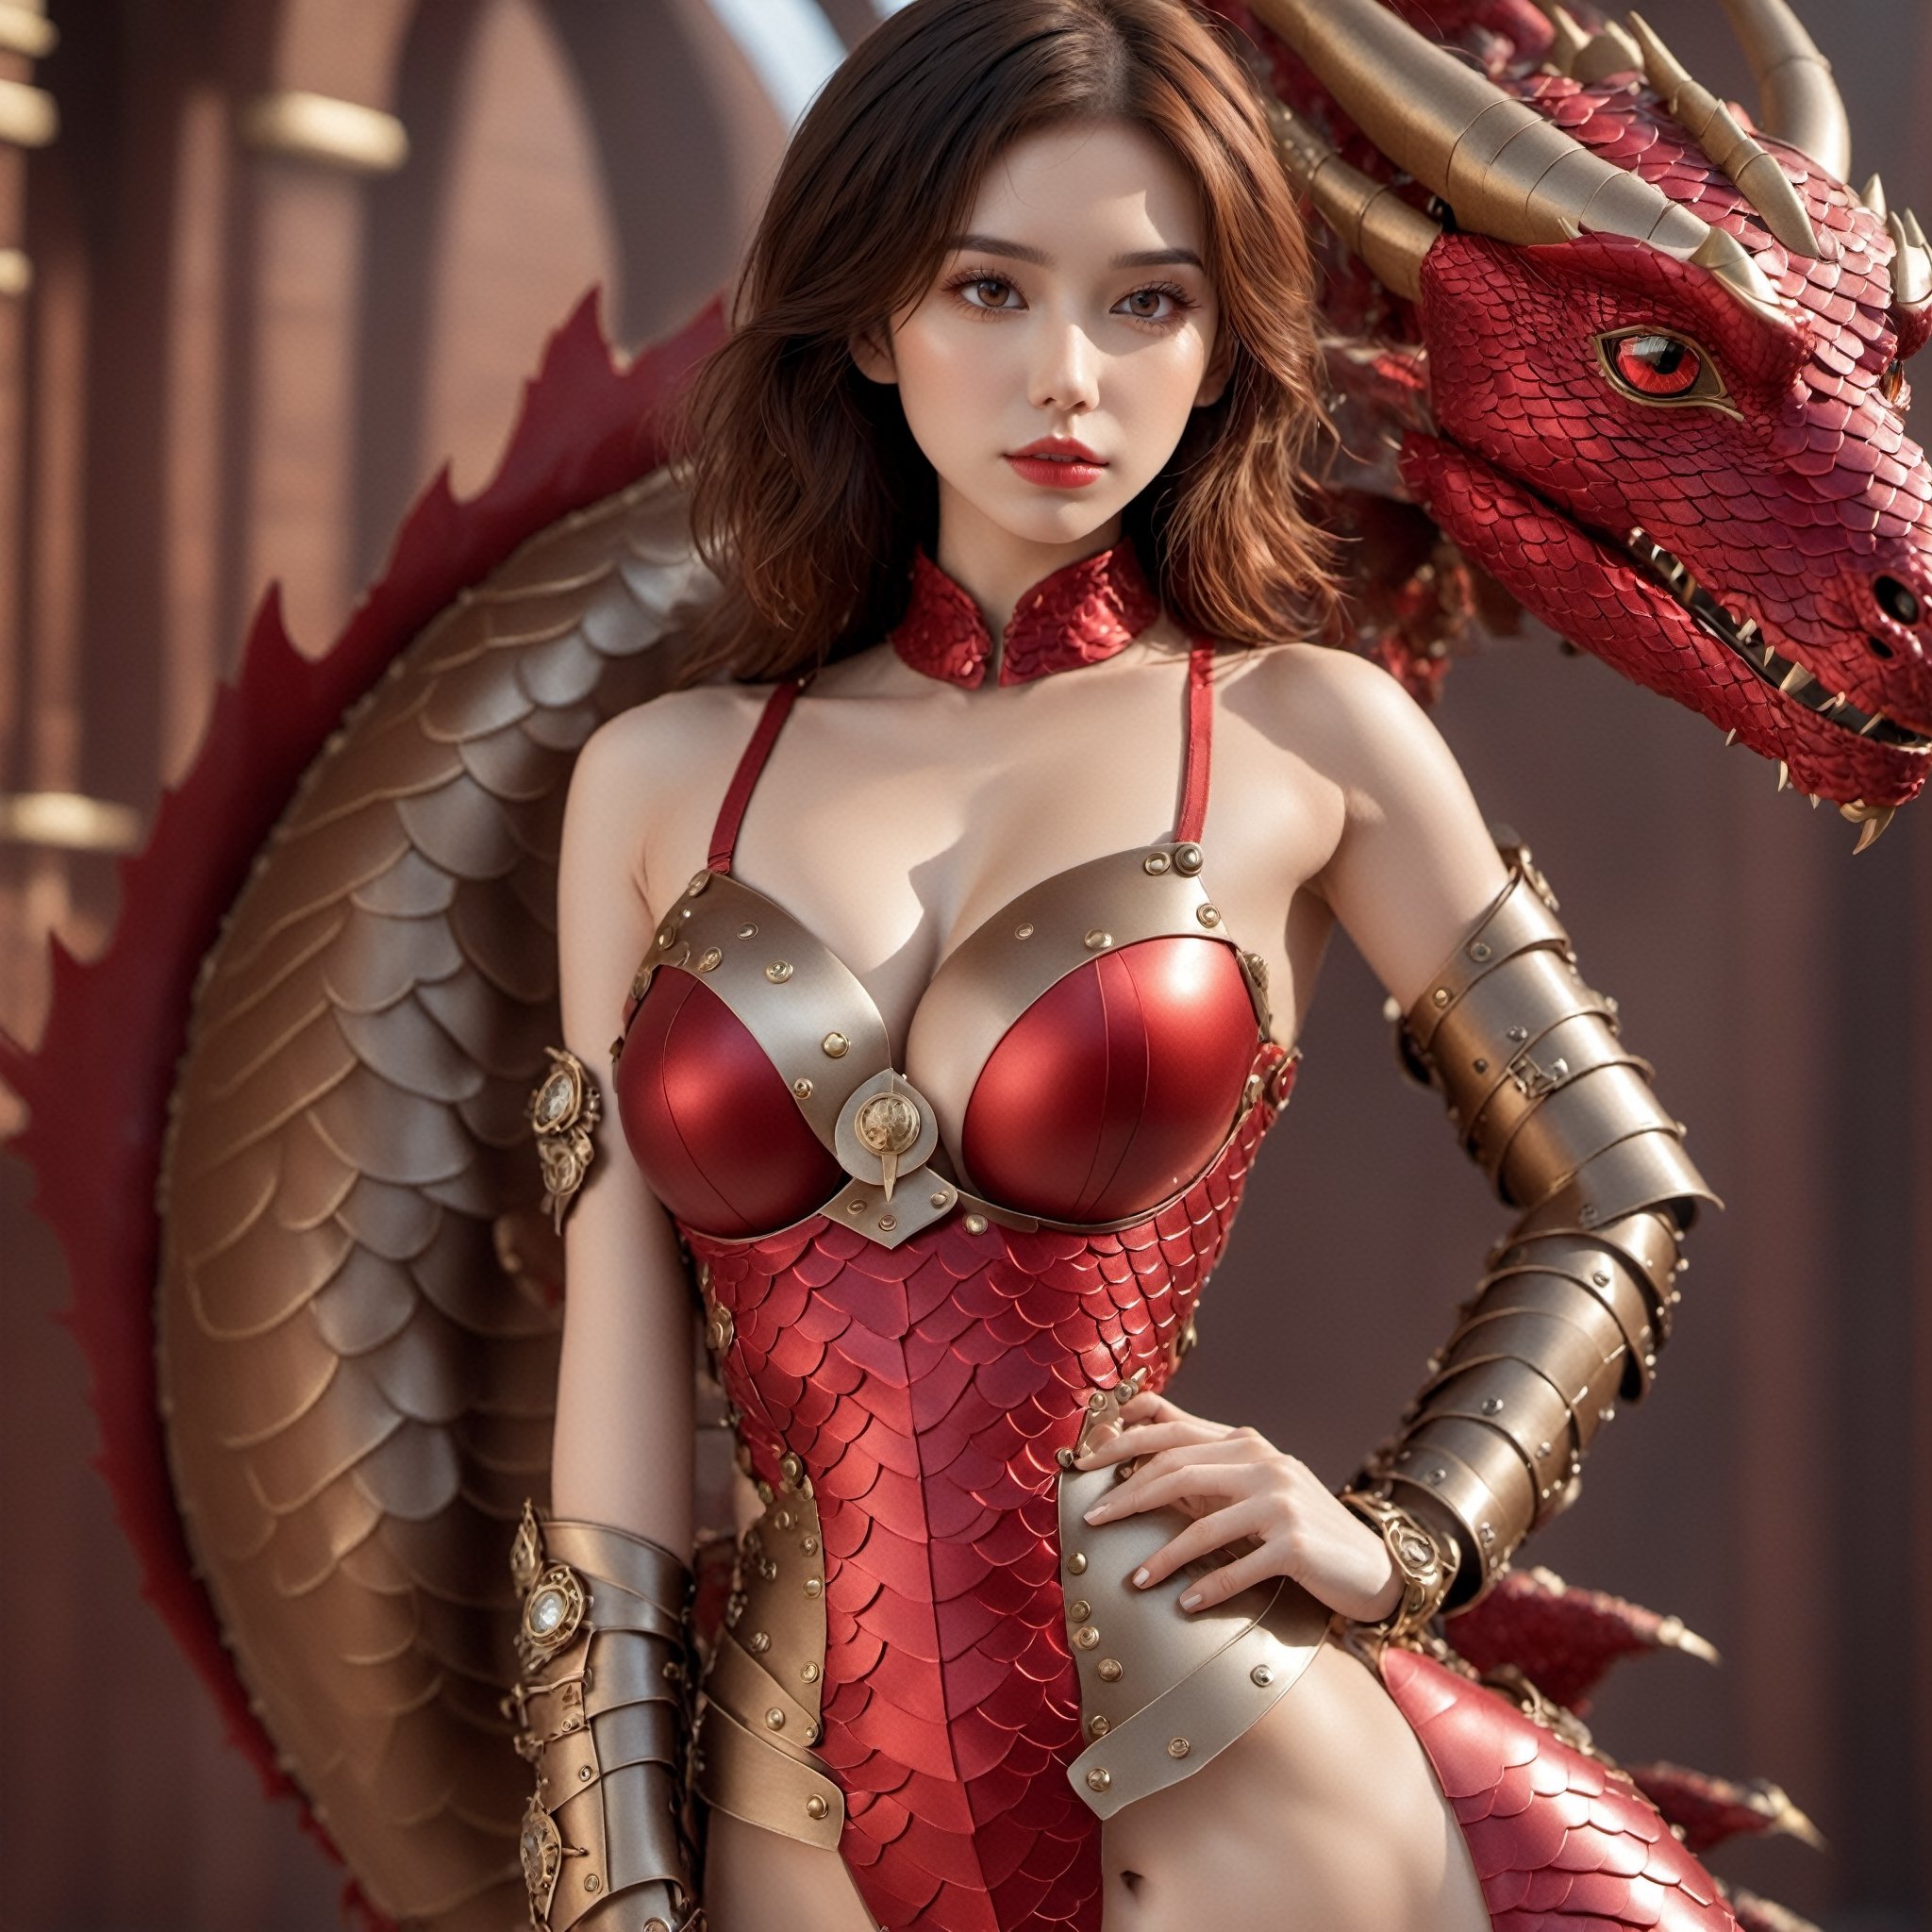 Wallpaper : breast, cleavage, cosplay, dragon, girl, sexy